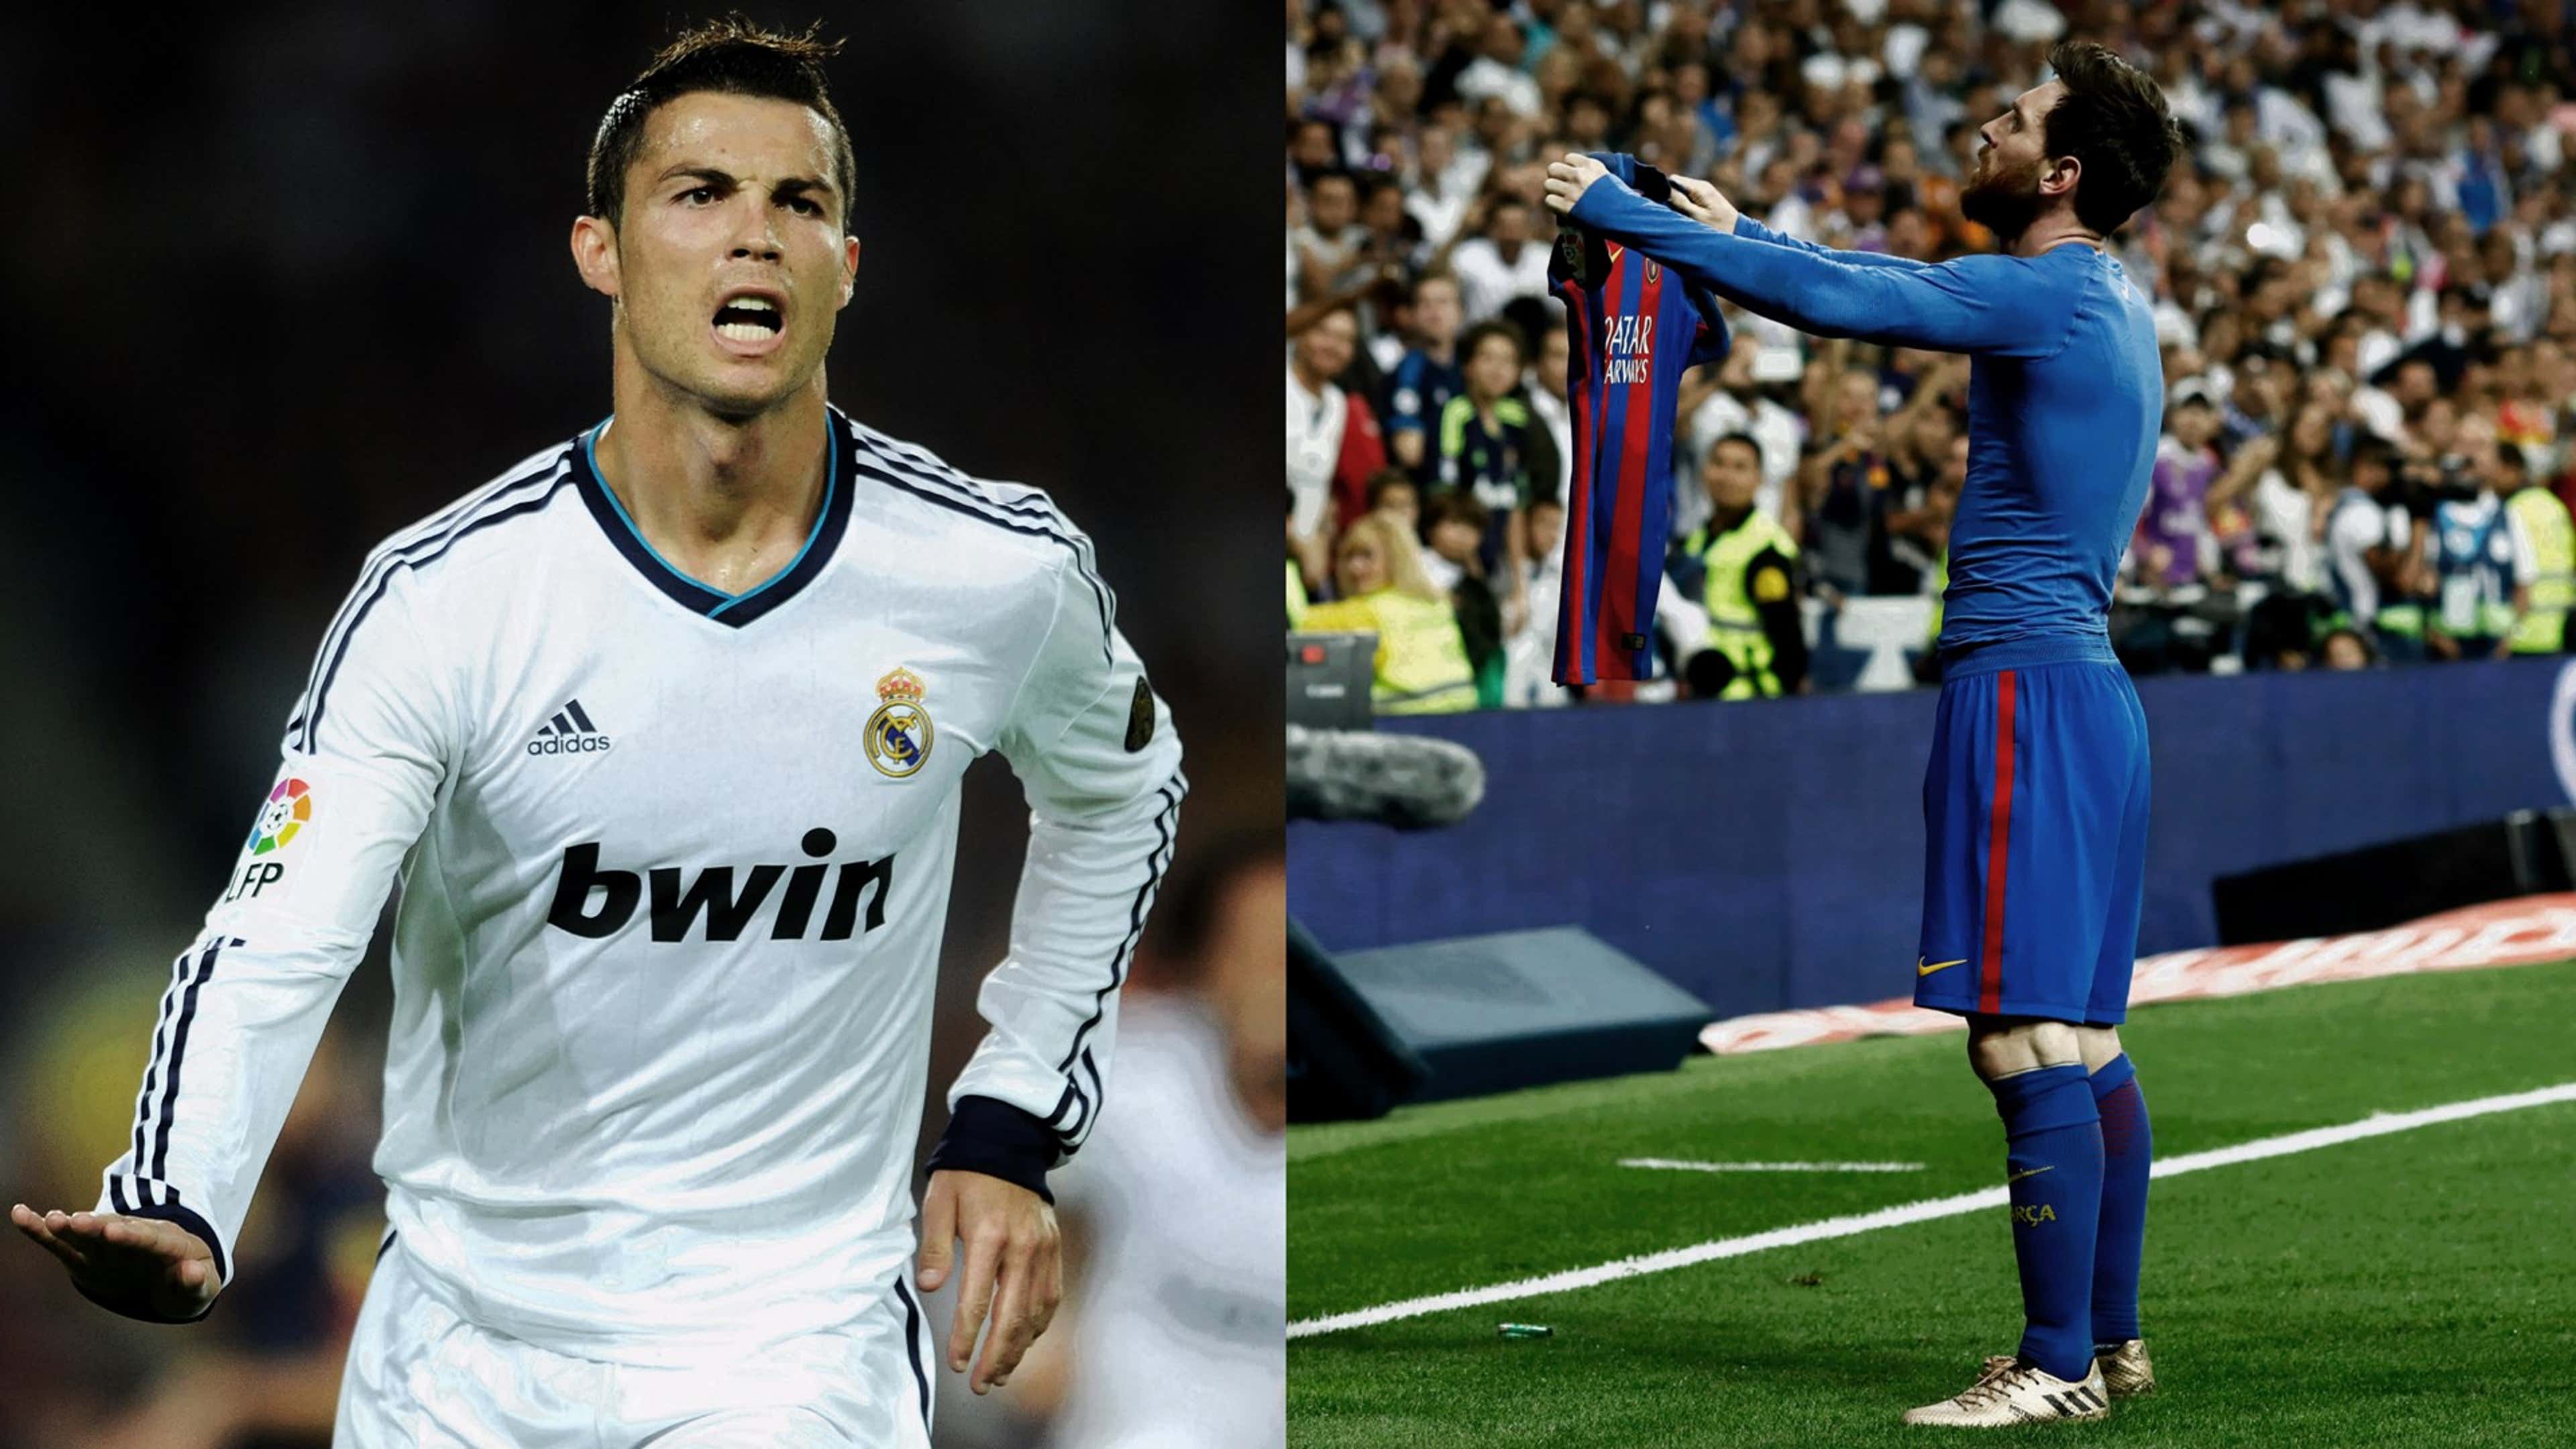 Picture of the century as Lionel Messi and Cristiano Ronaldo